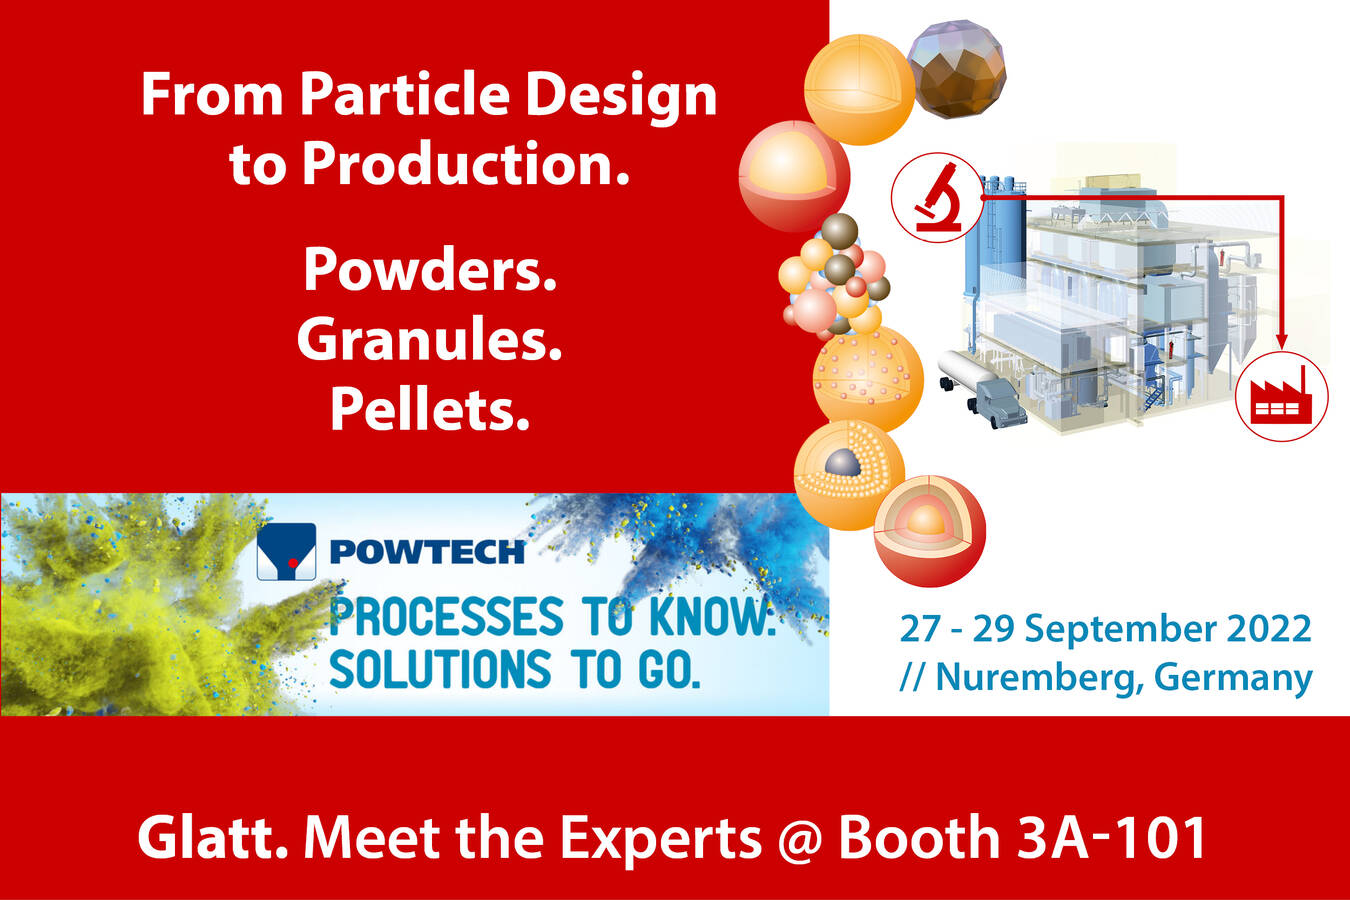 Glatt Particle Design + Plant Engineering at POWTECH 2022 Glatt will focus on its process, technology and plant engineering expertise for functional powders, granules and pellets 